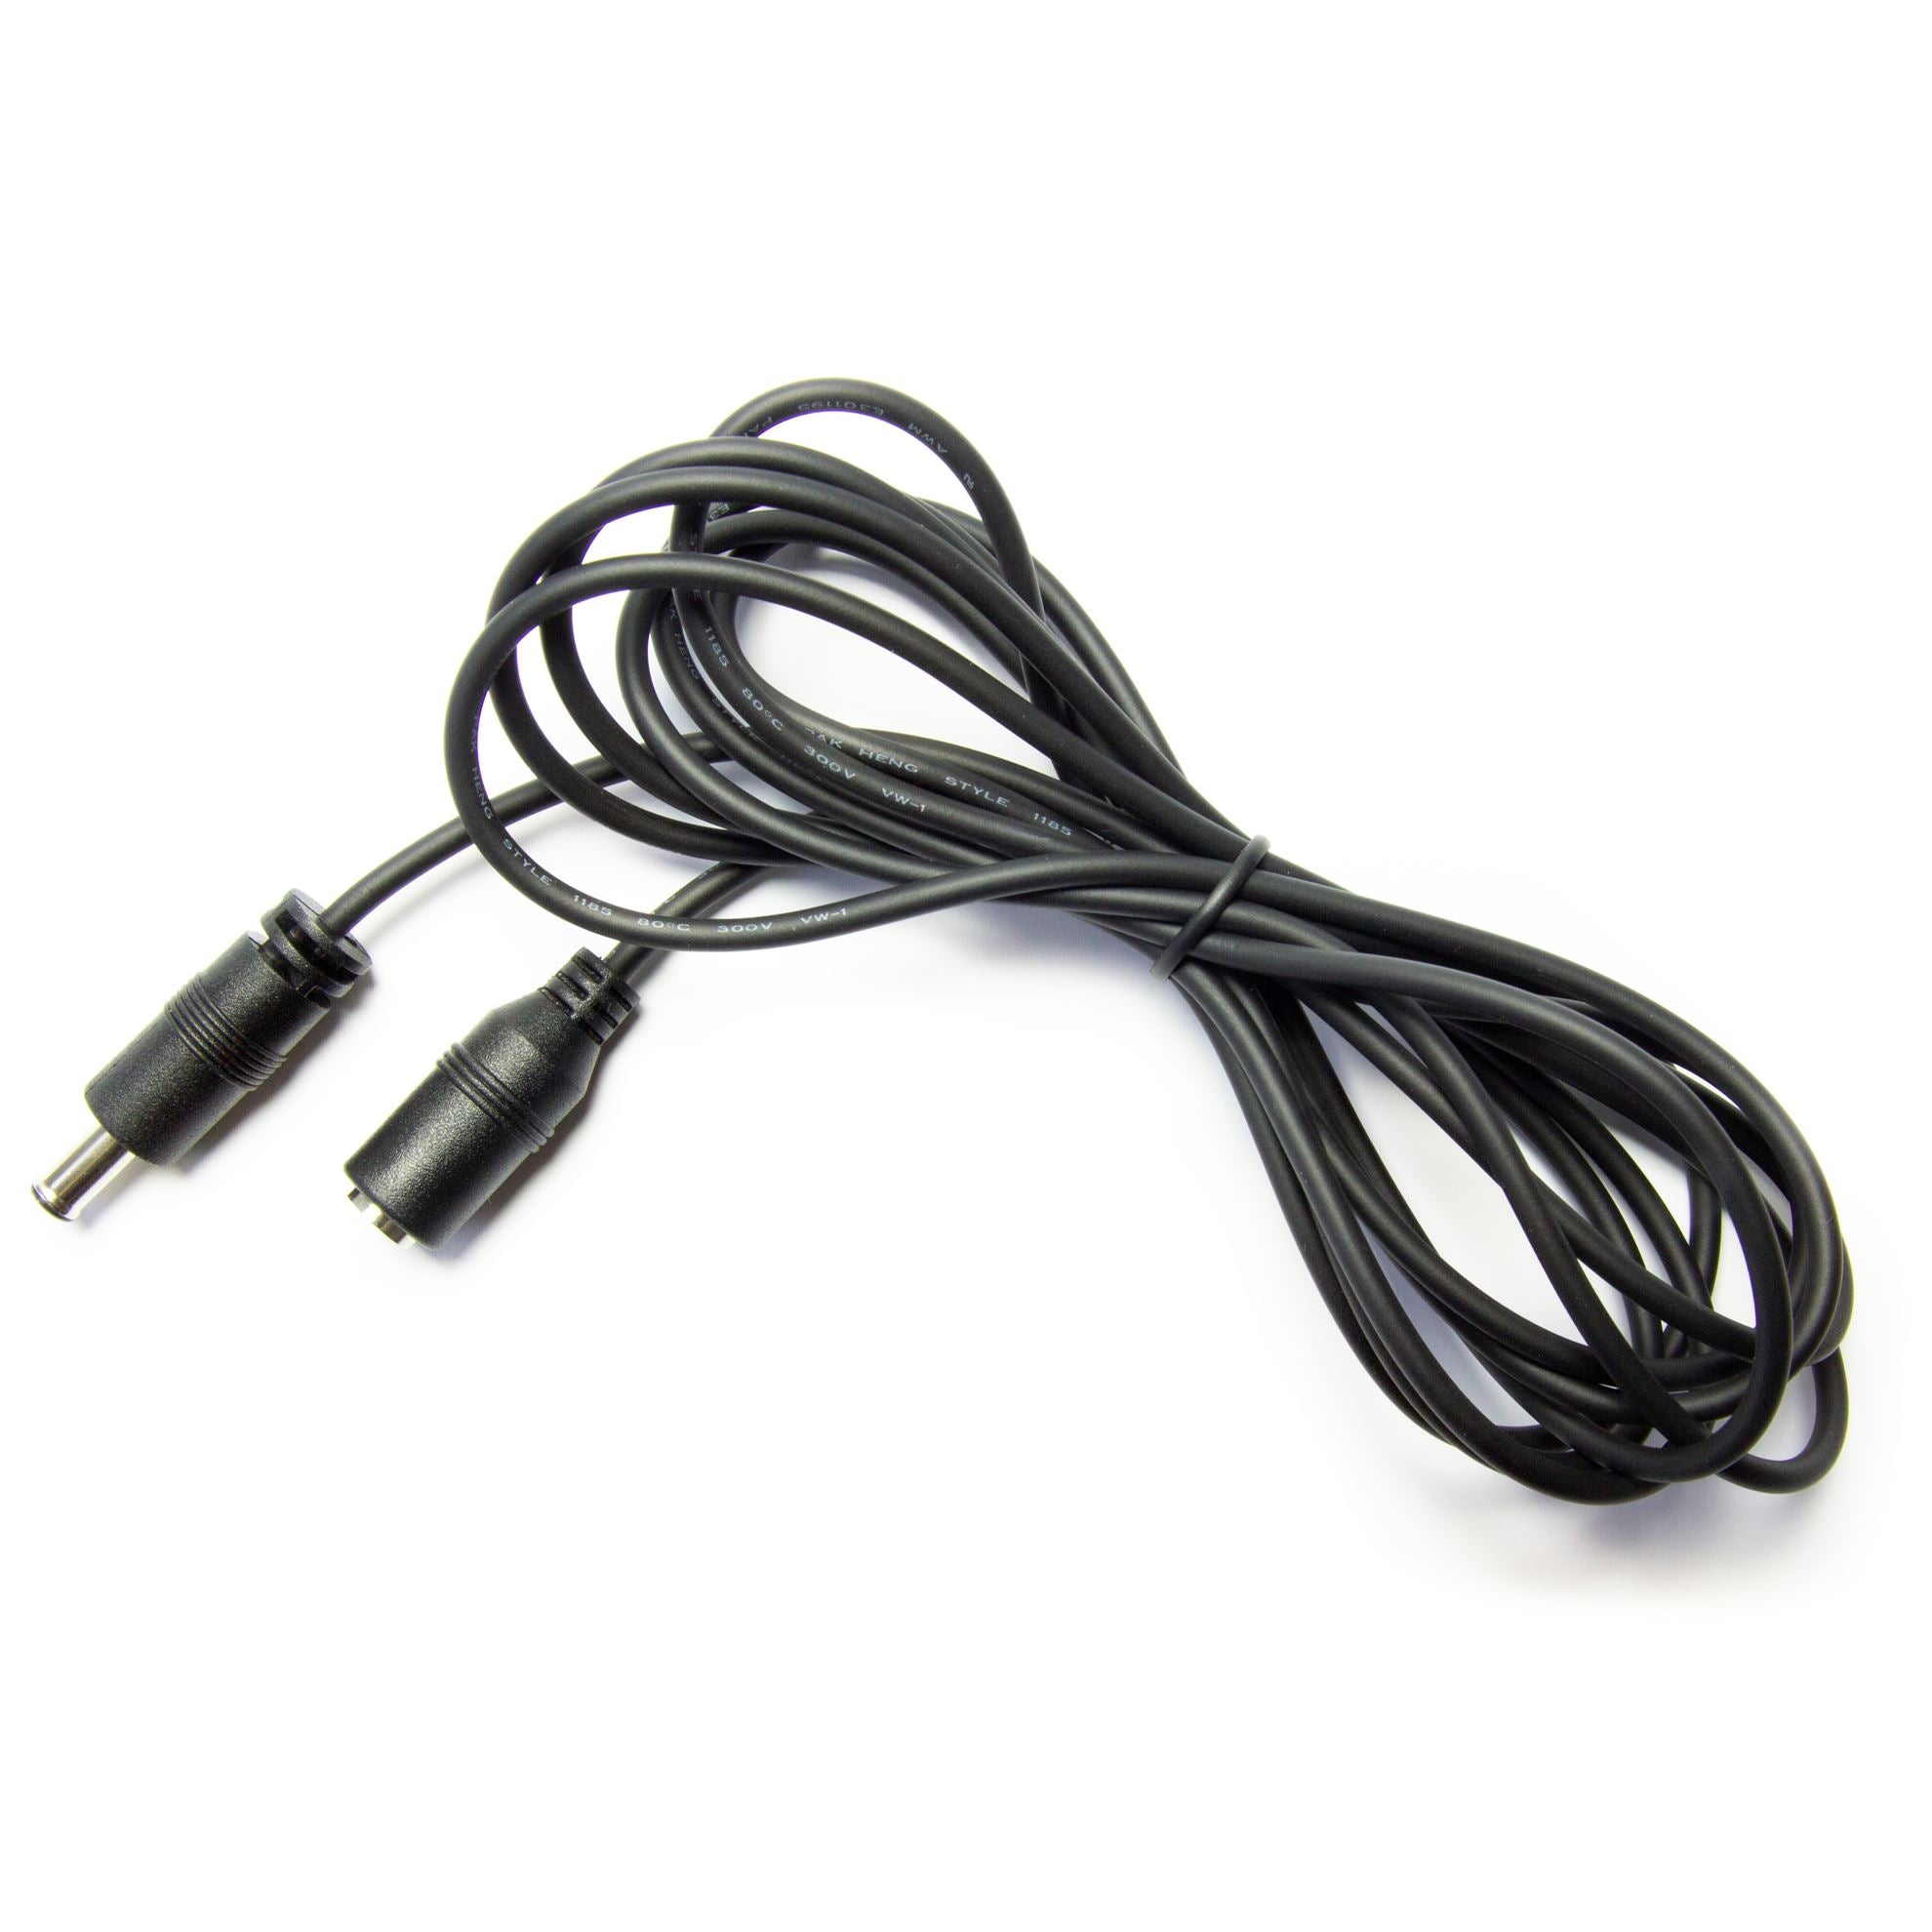 KONFTEL_Deskphone_Adapter_for_55-Series._Includes_0.5M_and_3M_Connection_Cable.